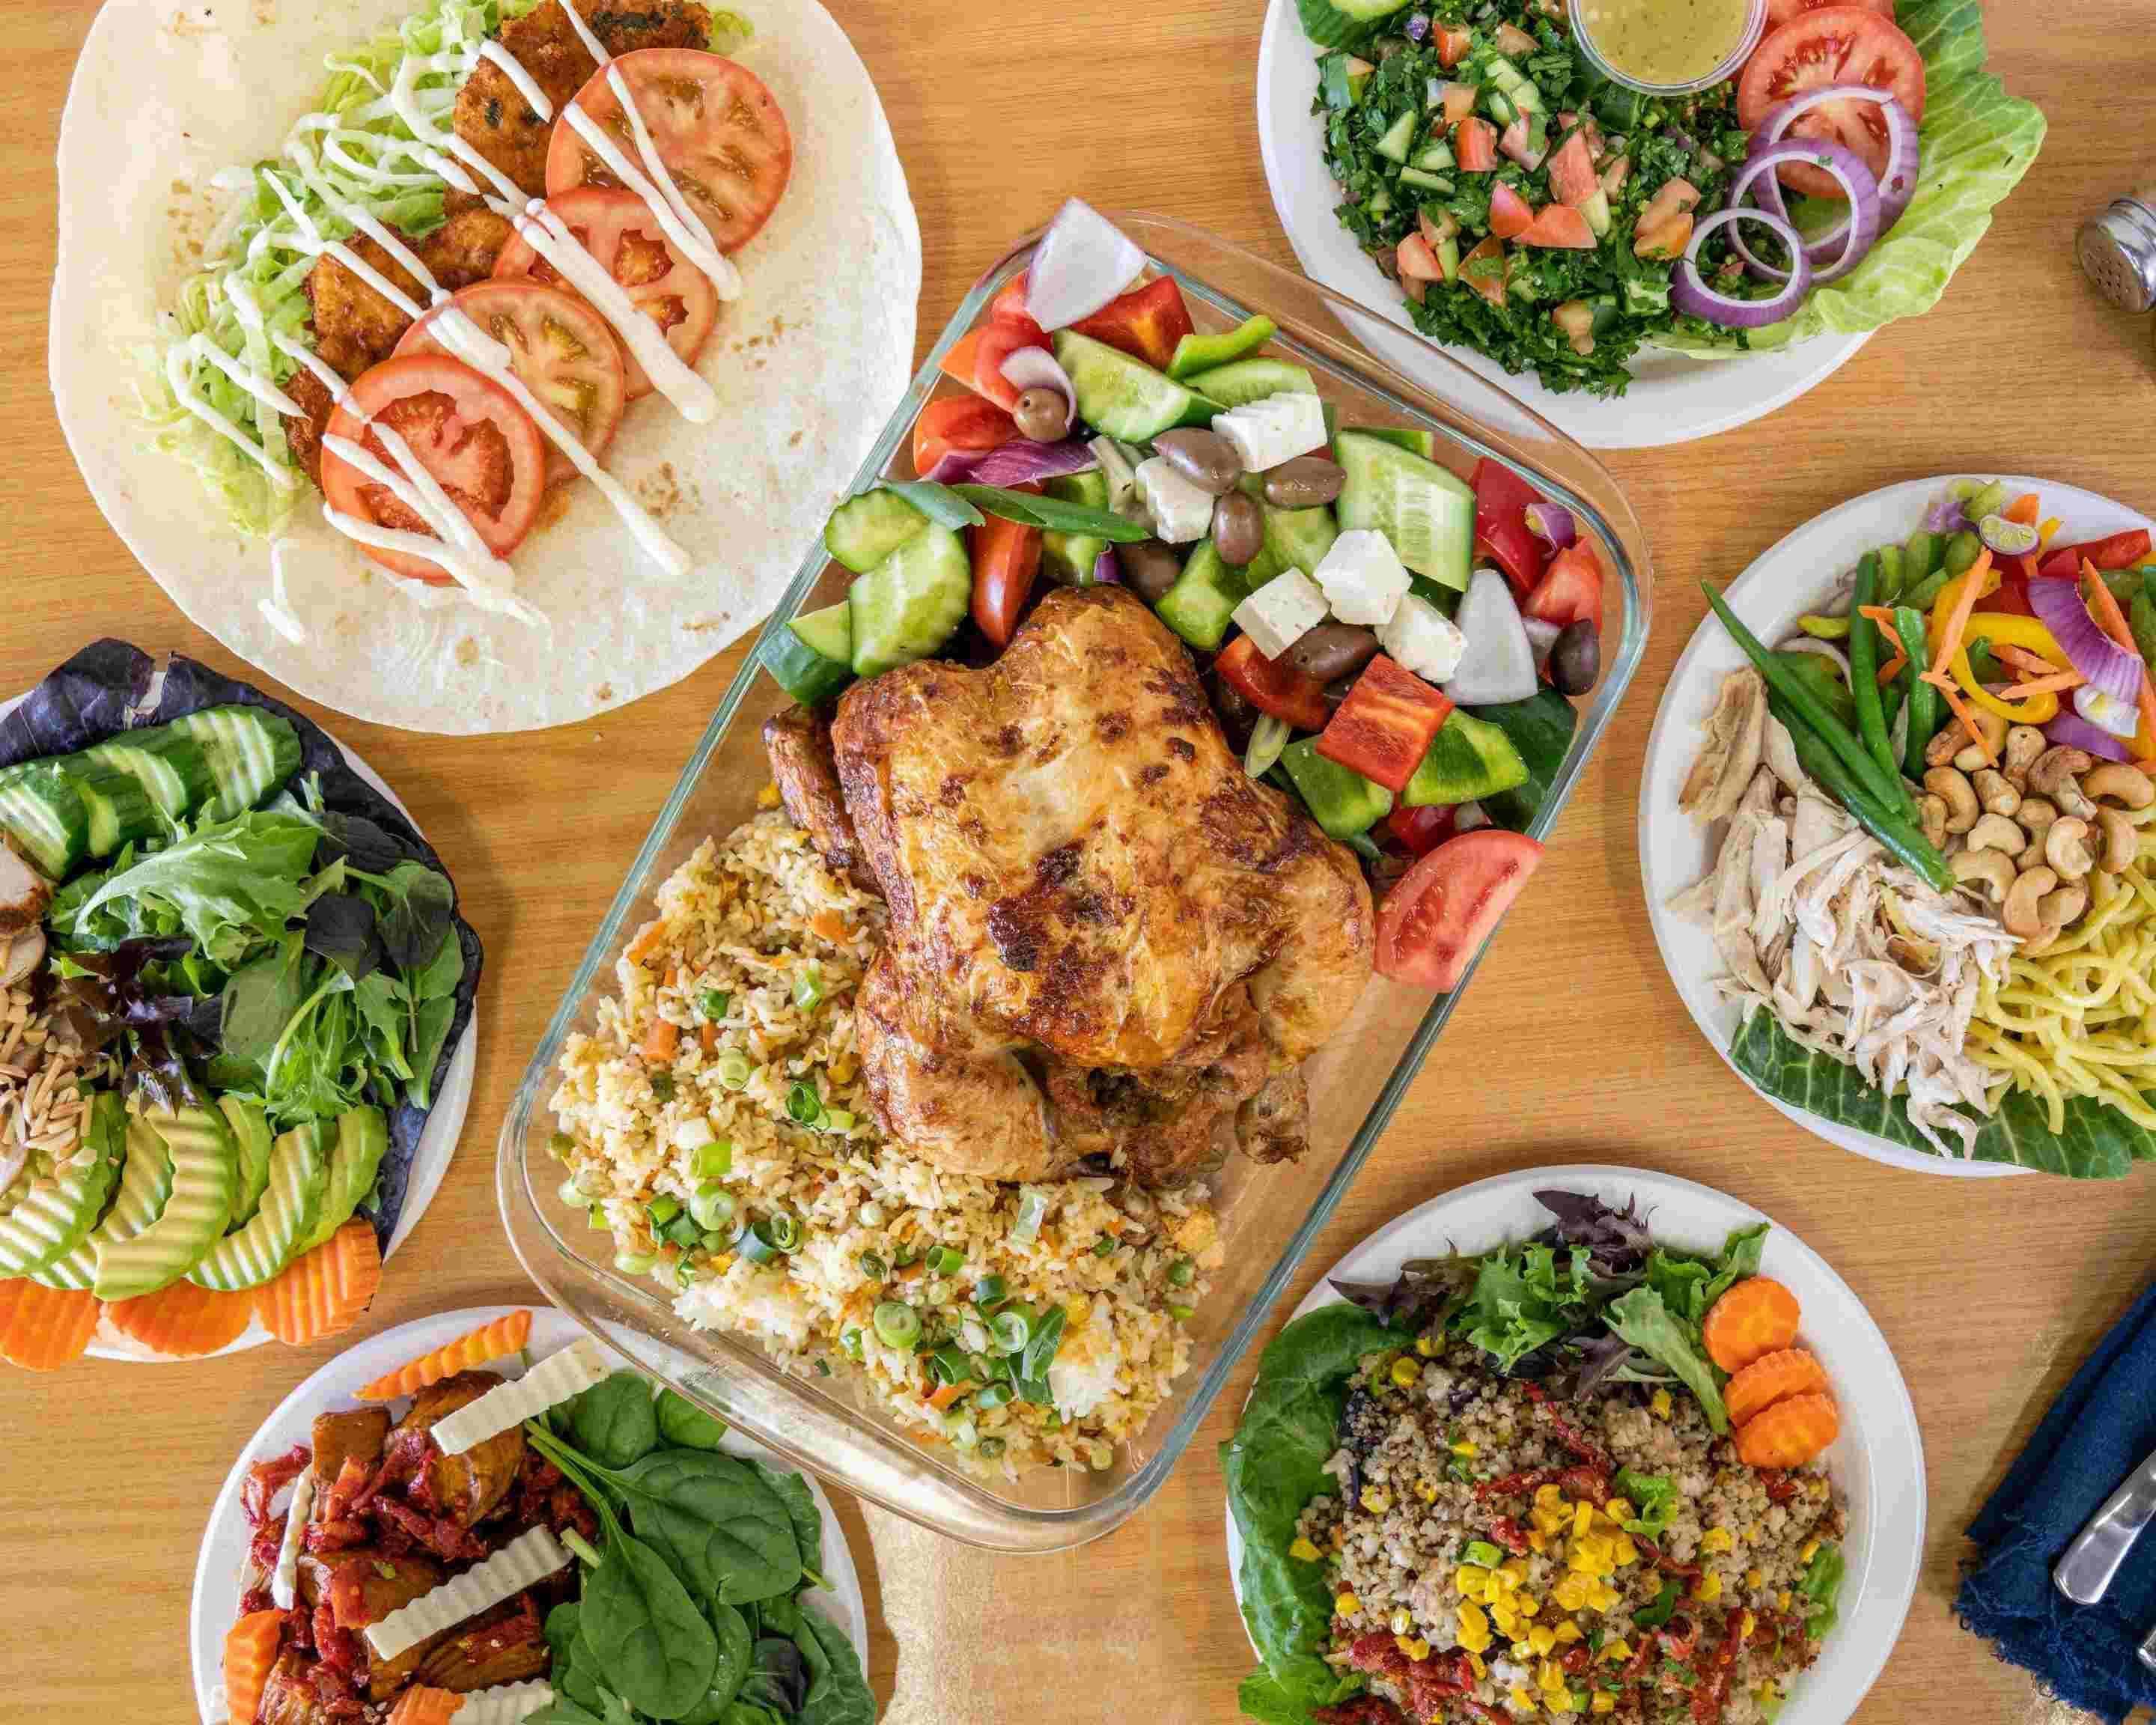 Bursting with Flavours Menu Takeout in Sydney | Delivery Menu & Prices ...